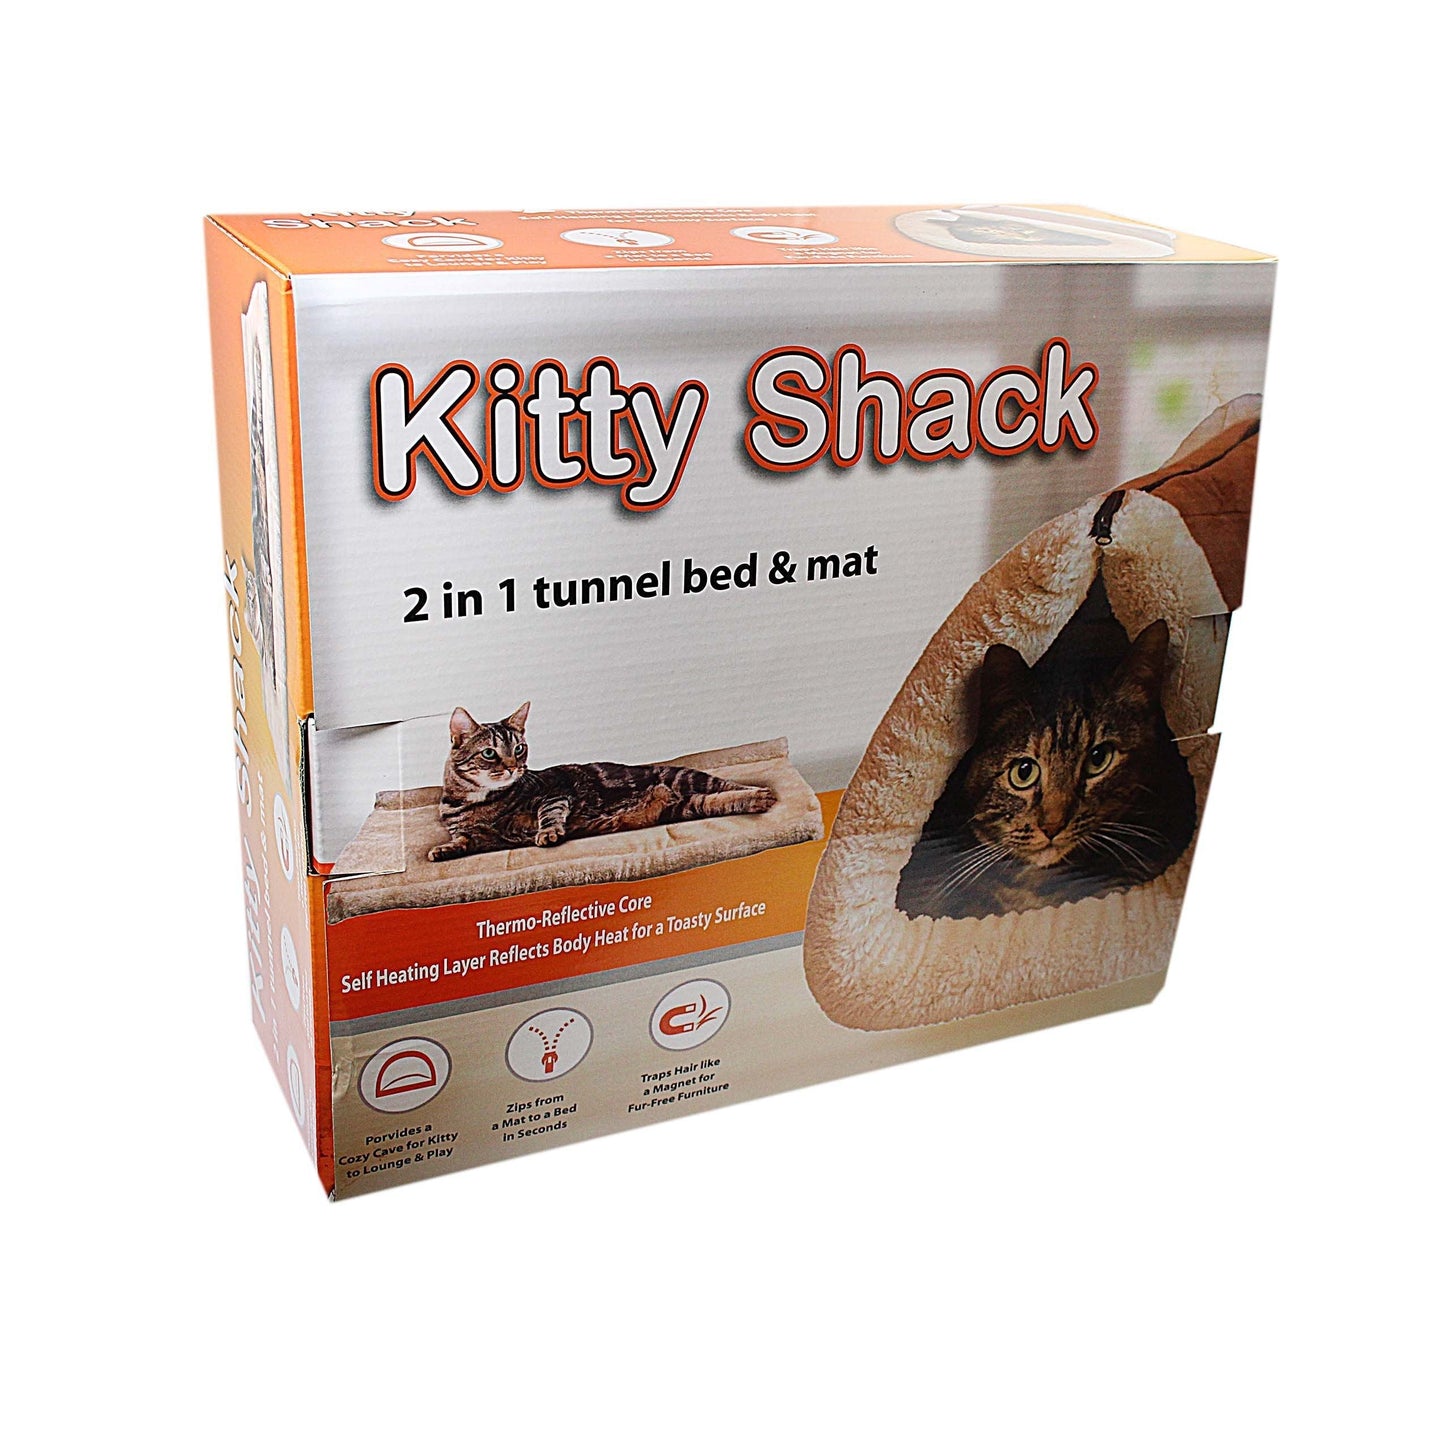 Kitty Shack 2 in 1 Tunnel Bed and Mat 5025 (Parcel Rate)